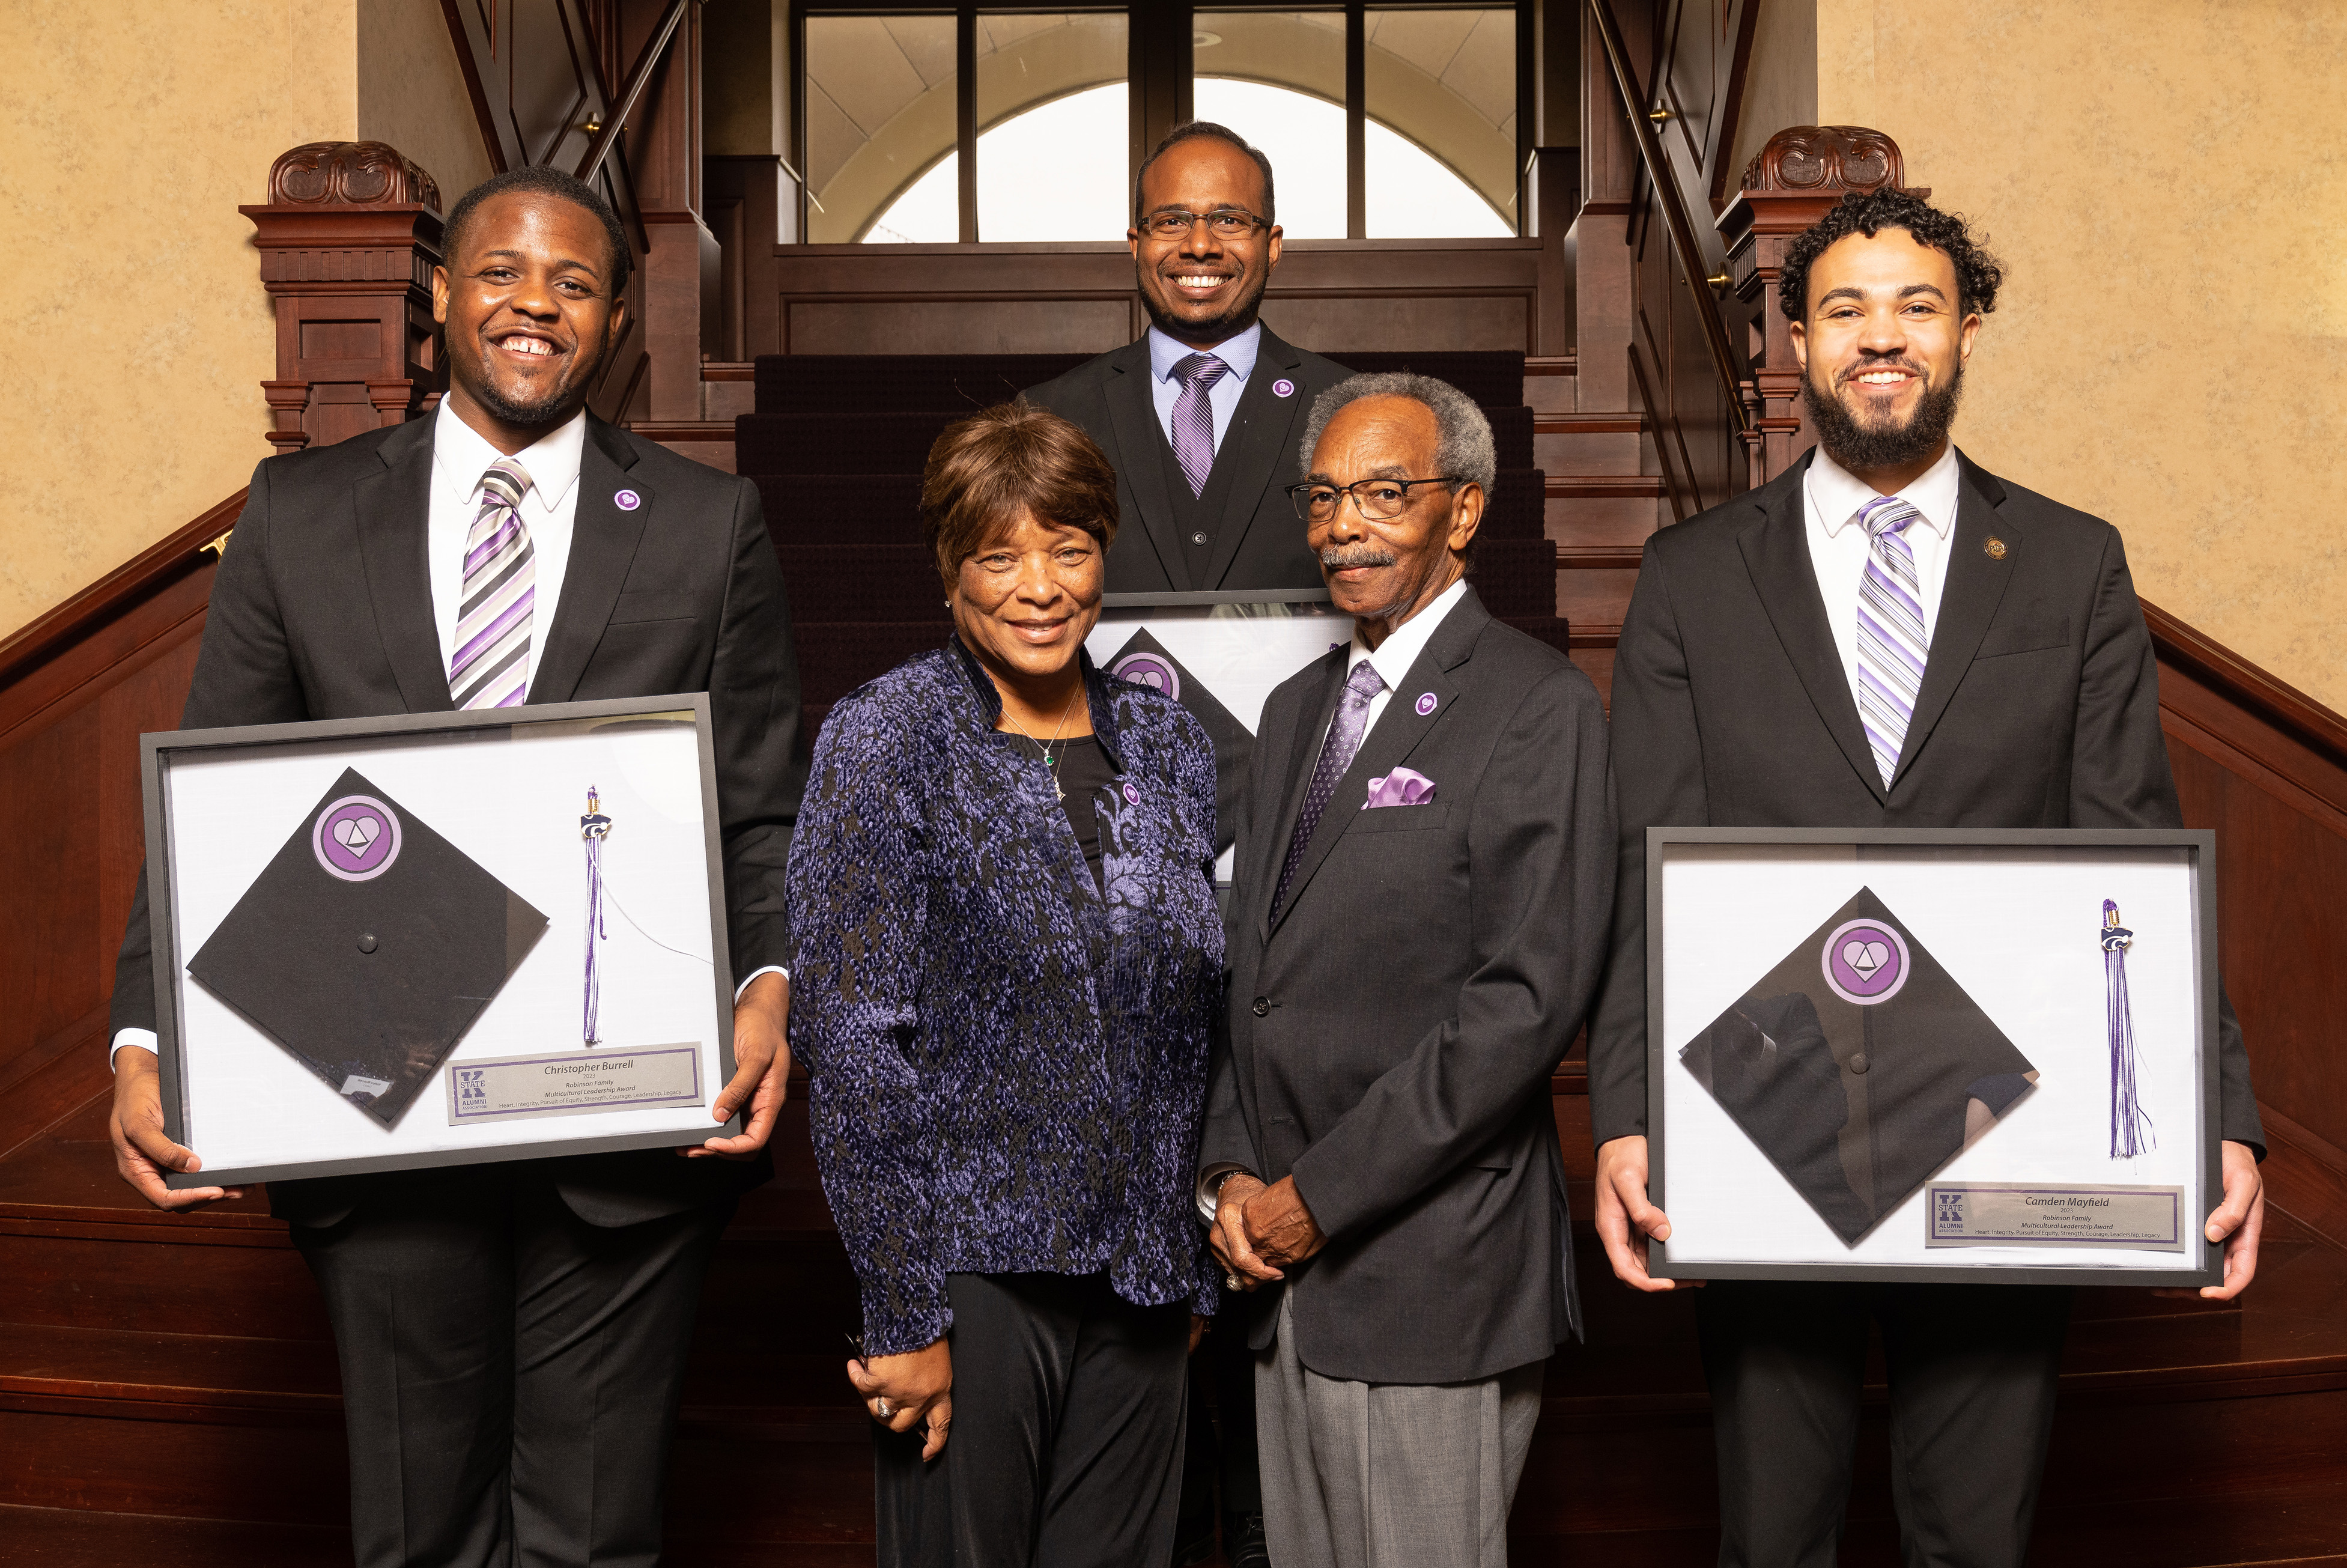 Robinson Family Multicultural Leadership Award recipients with their shadow boxes and Roy and Silvia Robinson